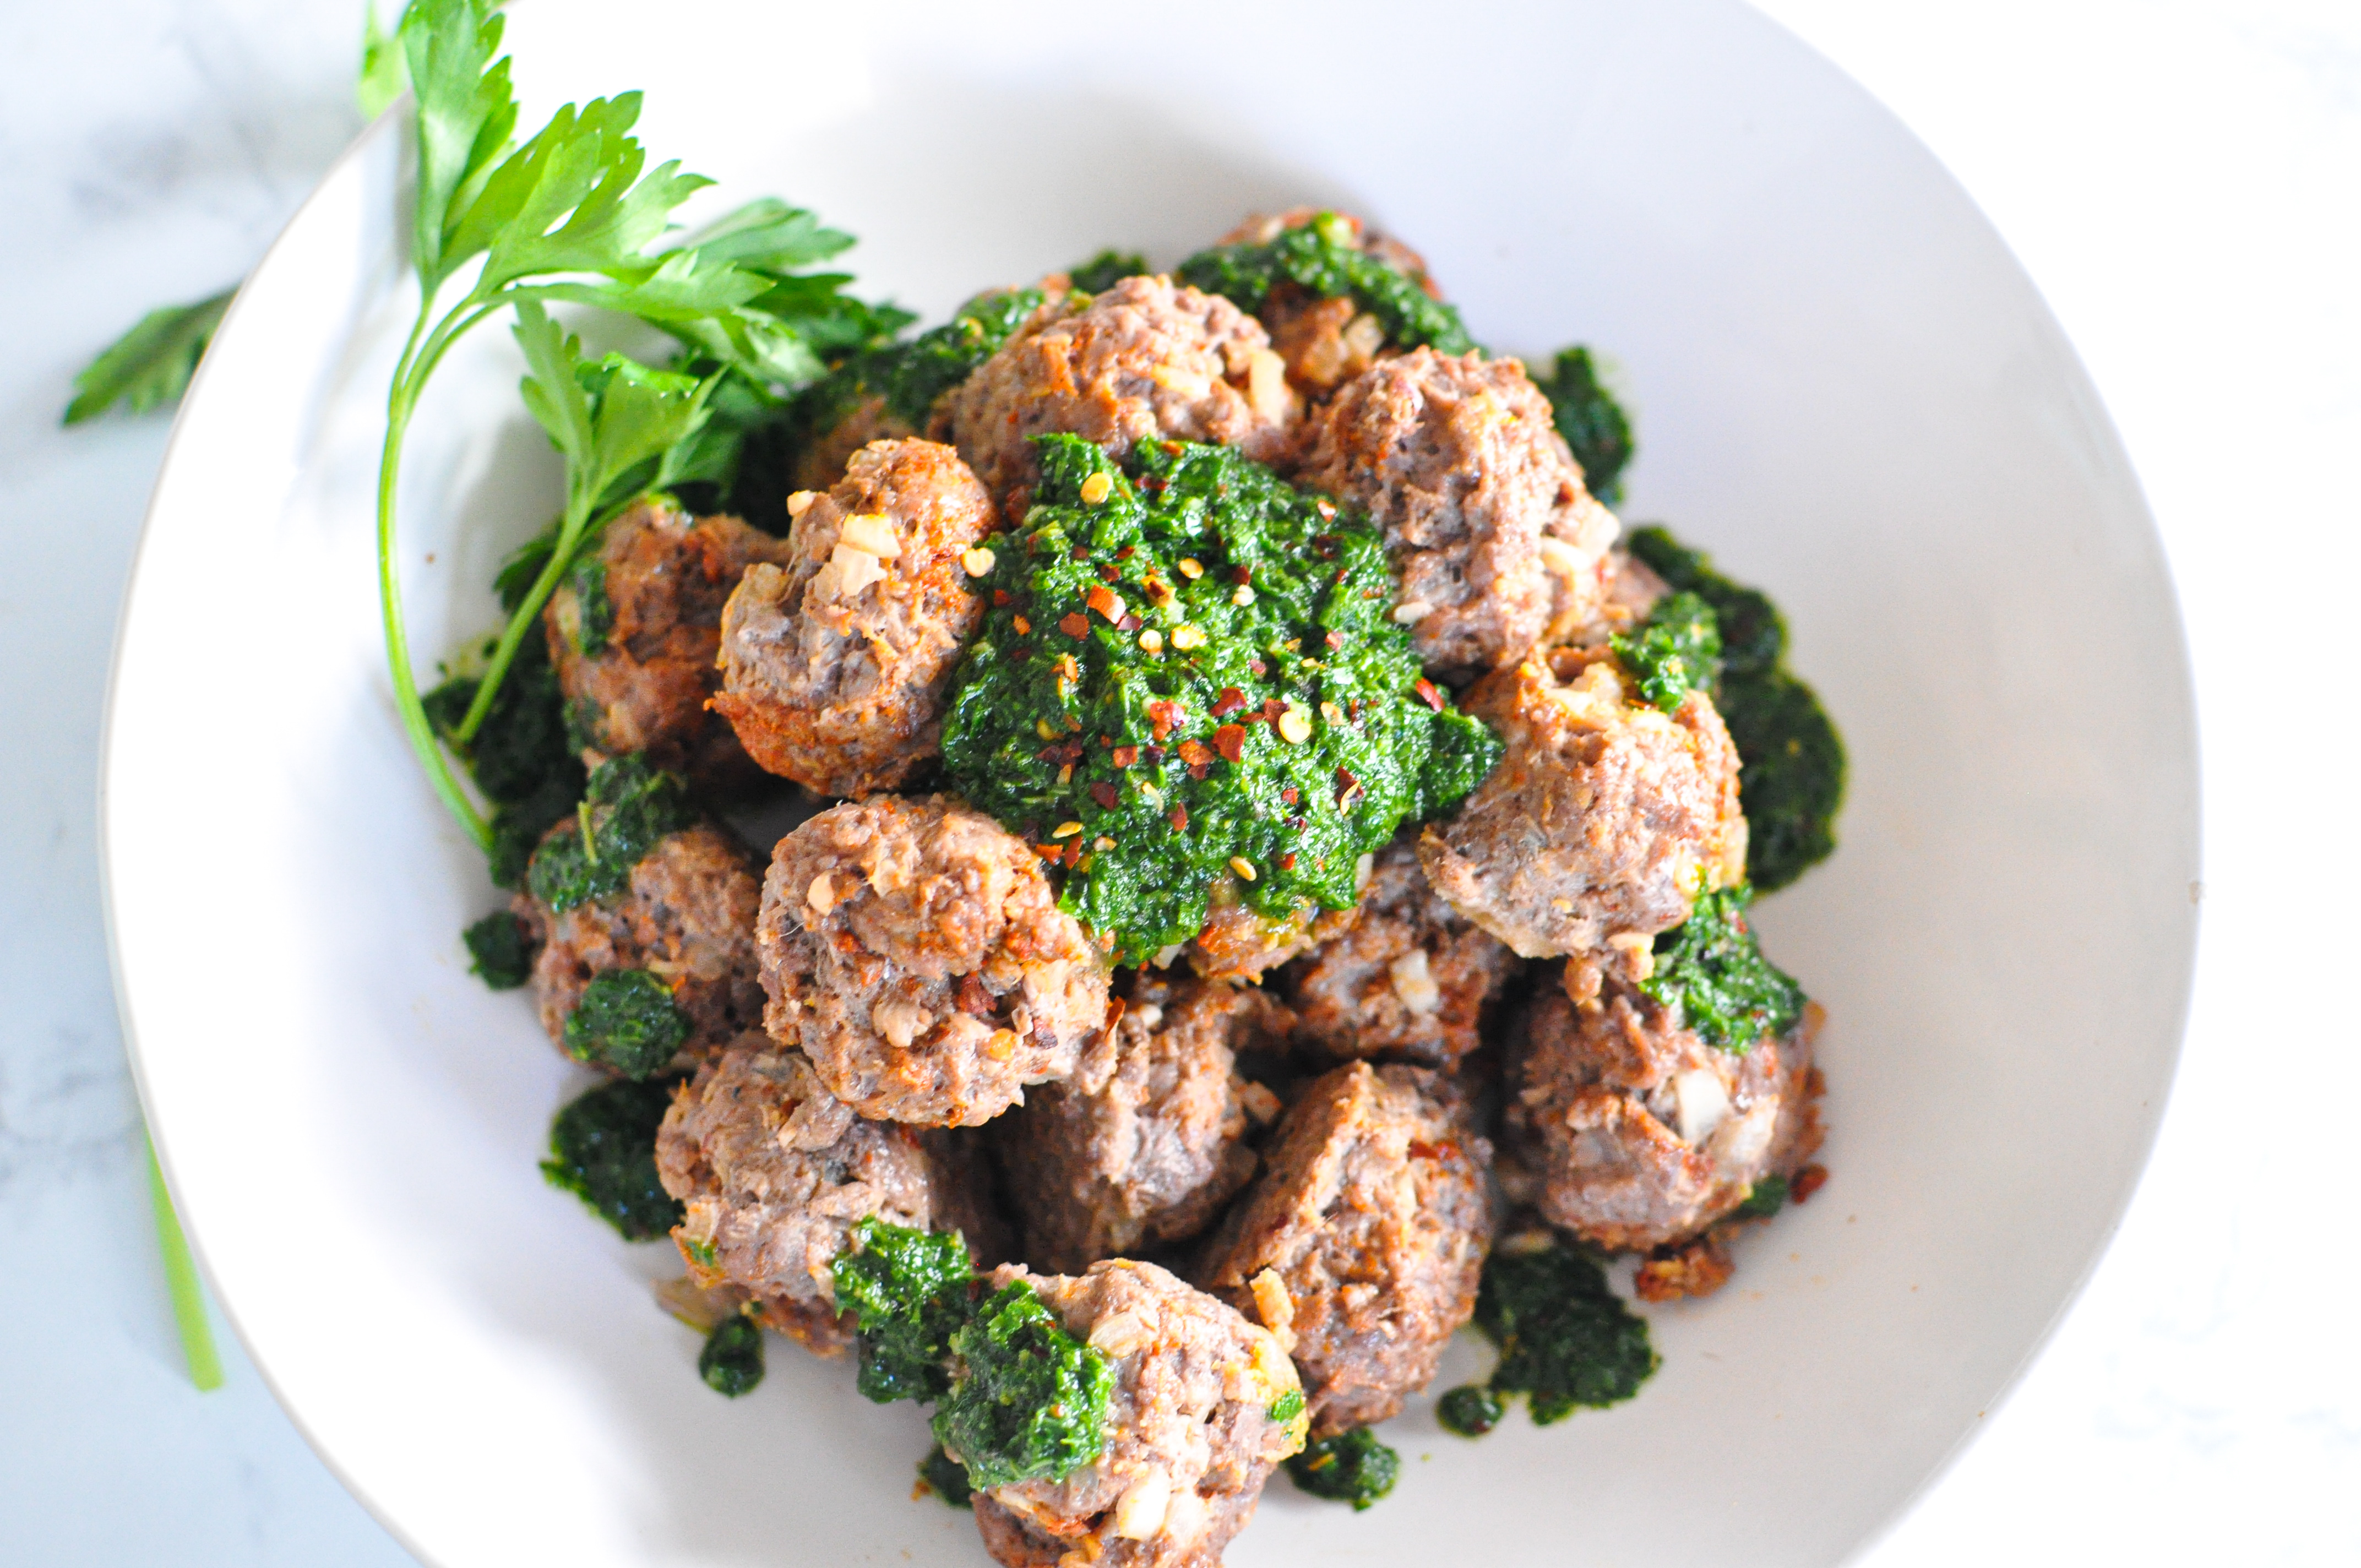 Paleo Chimichurri Meatballs (Become a Member for Access)